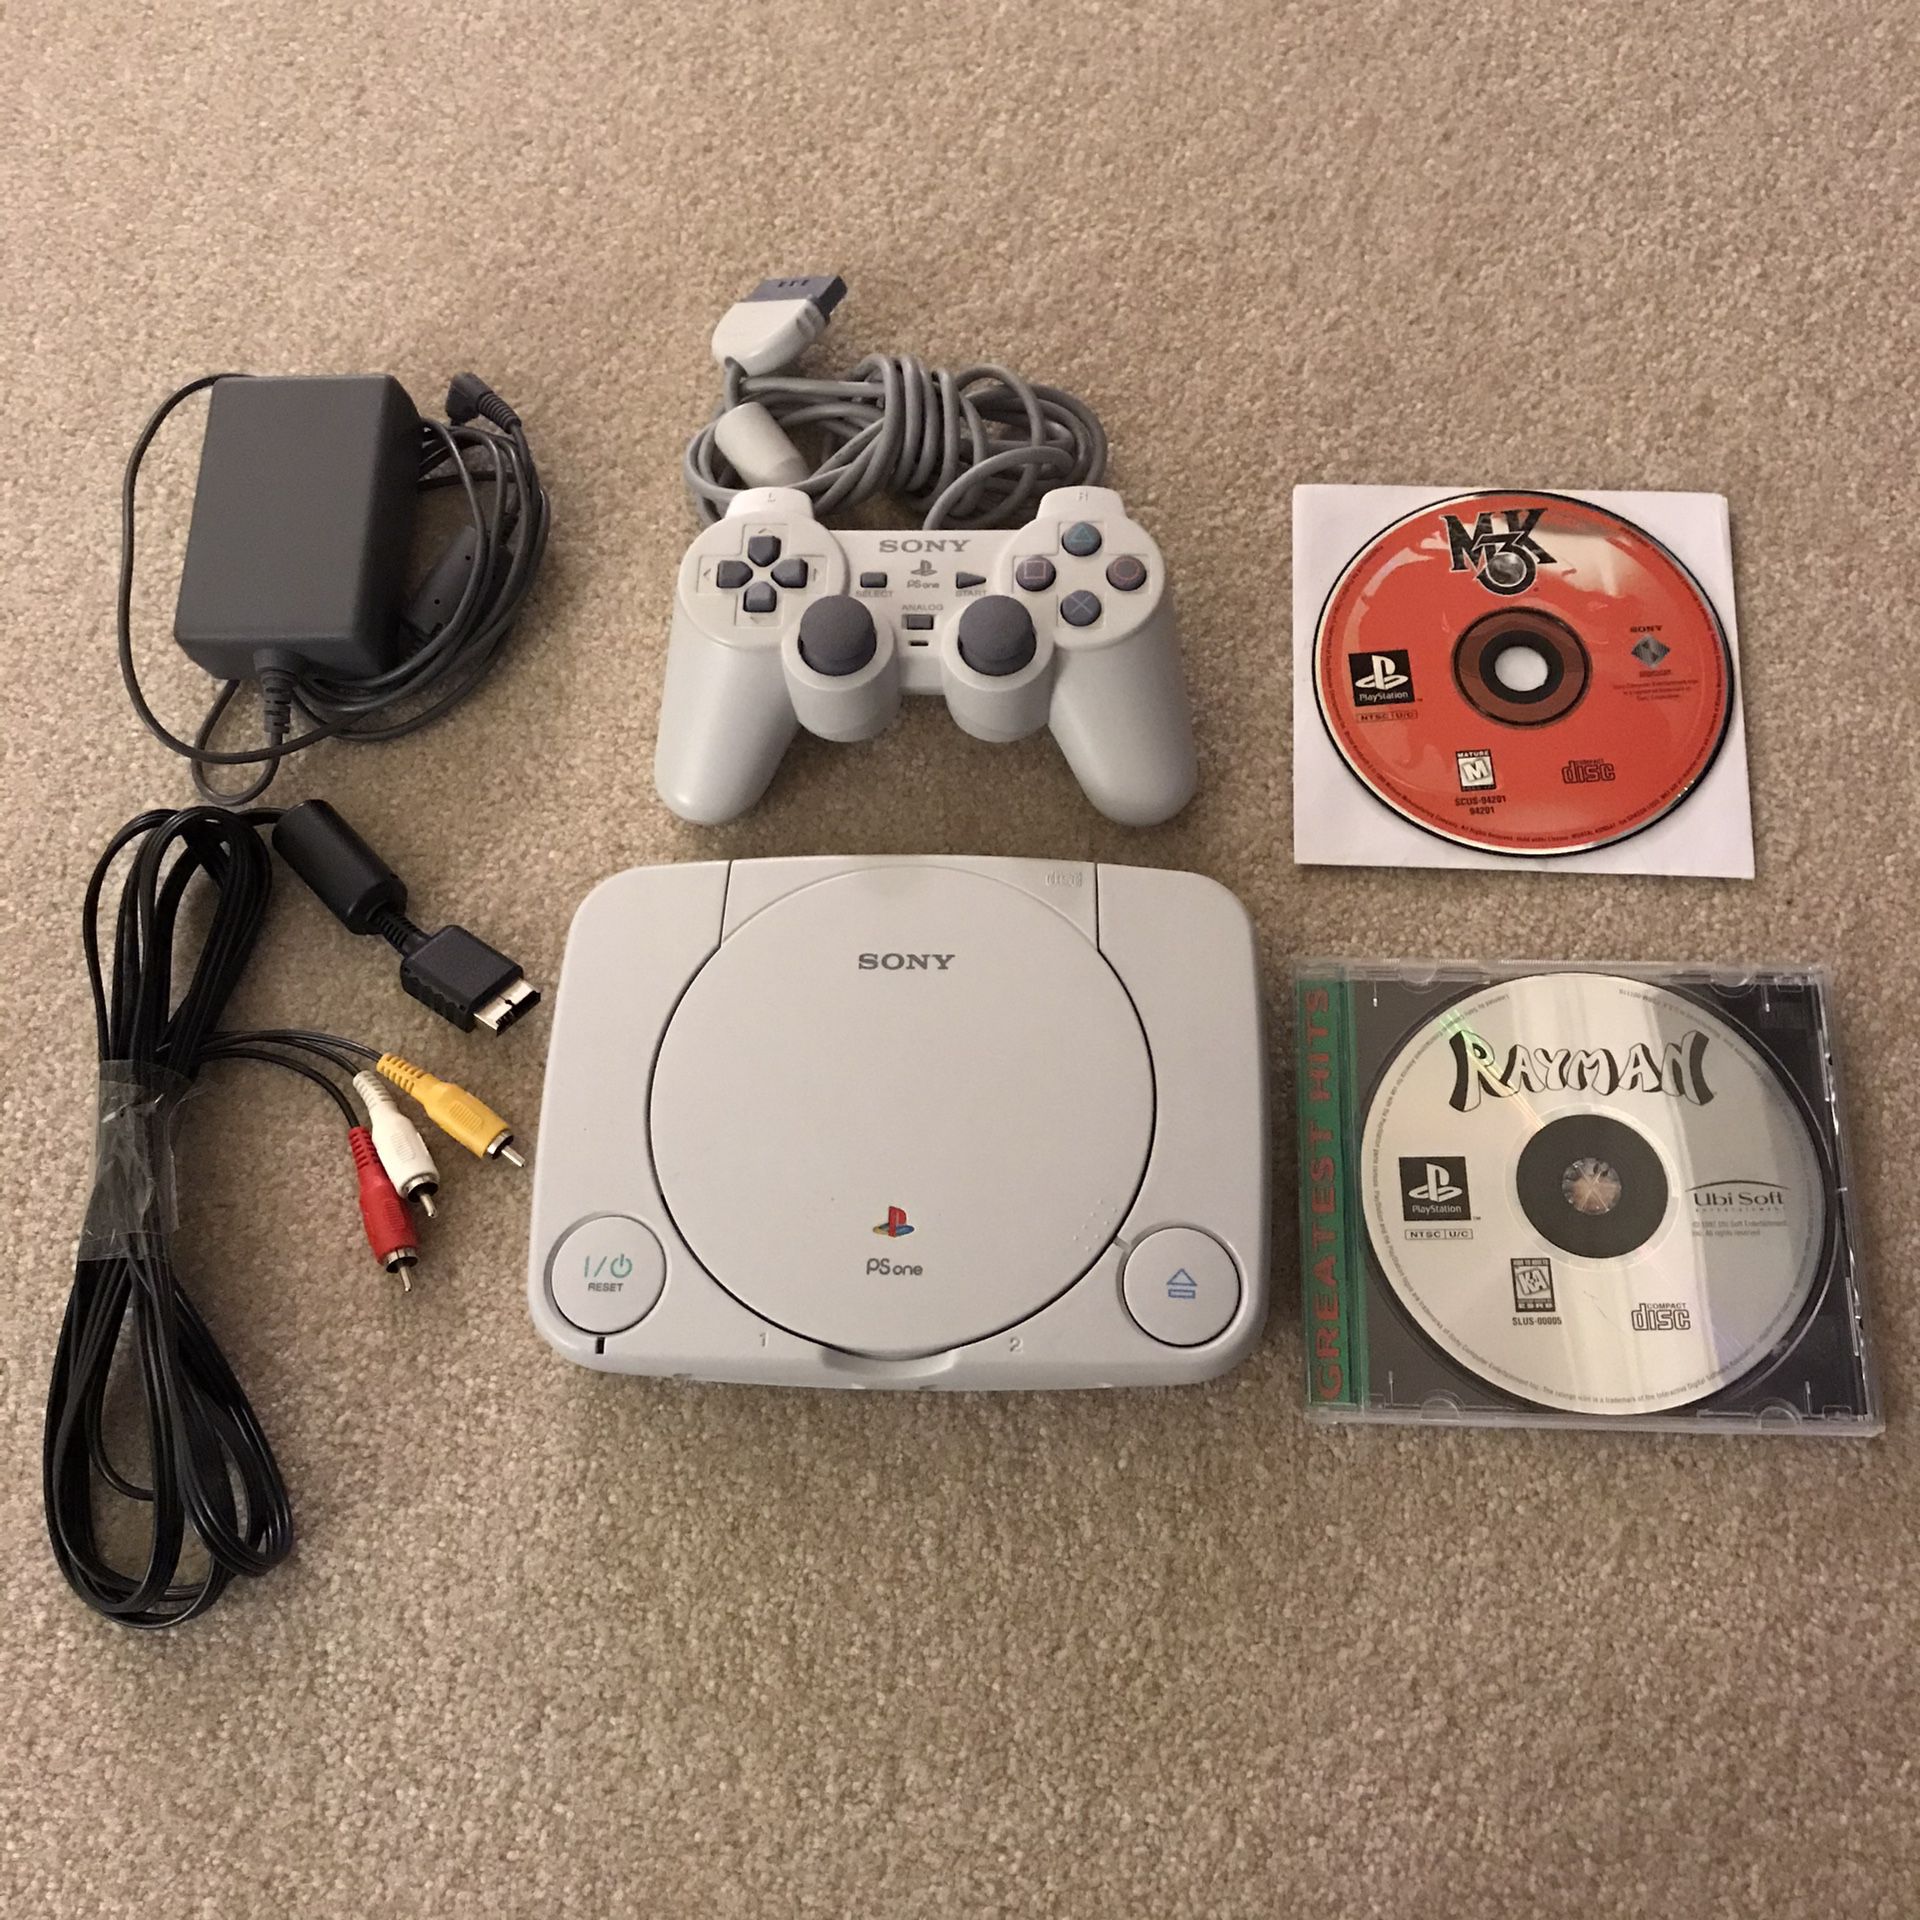 Playstation 1 psone ps1 system console with 2 video games rayman mortal kombat 3 controller cables